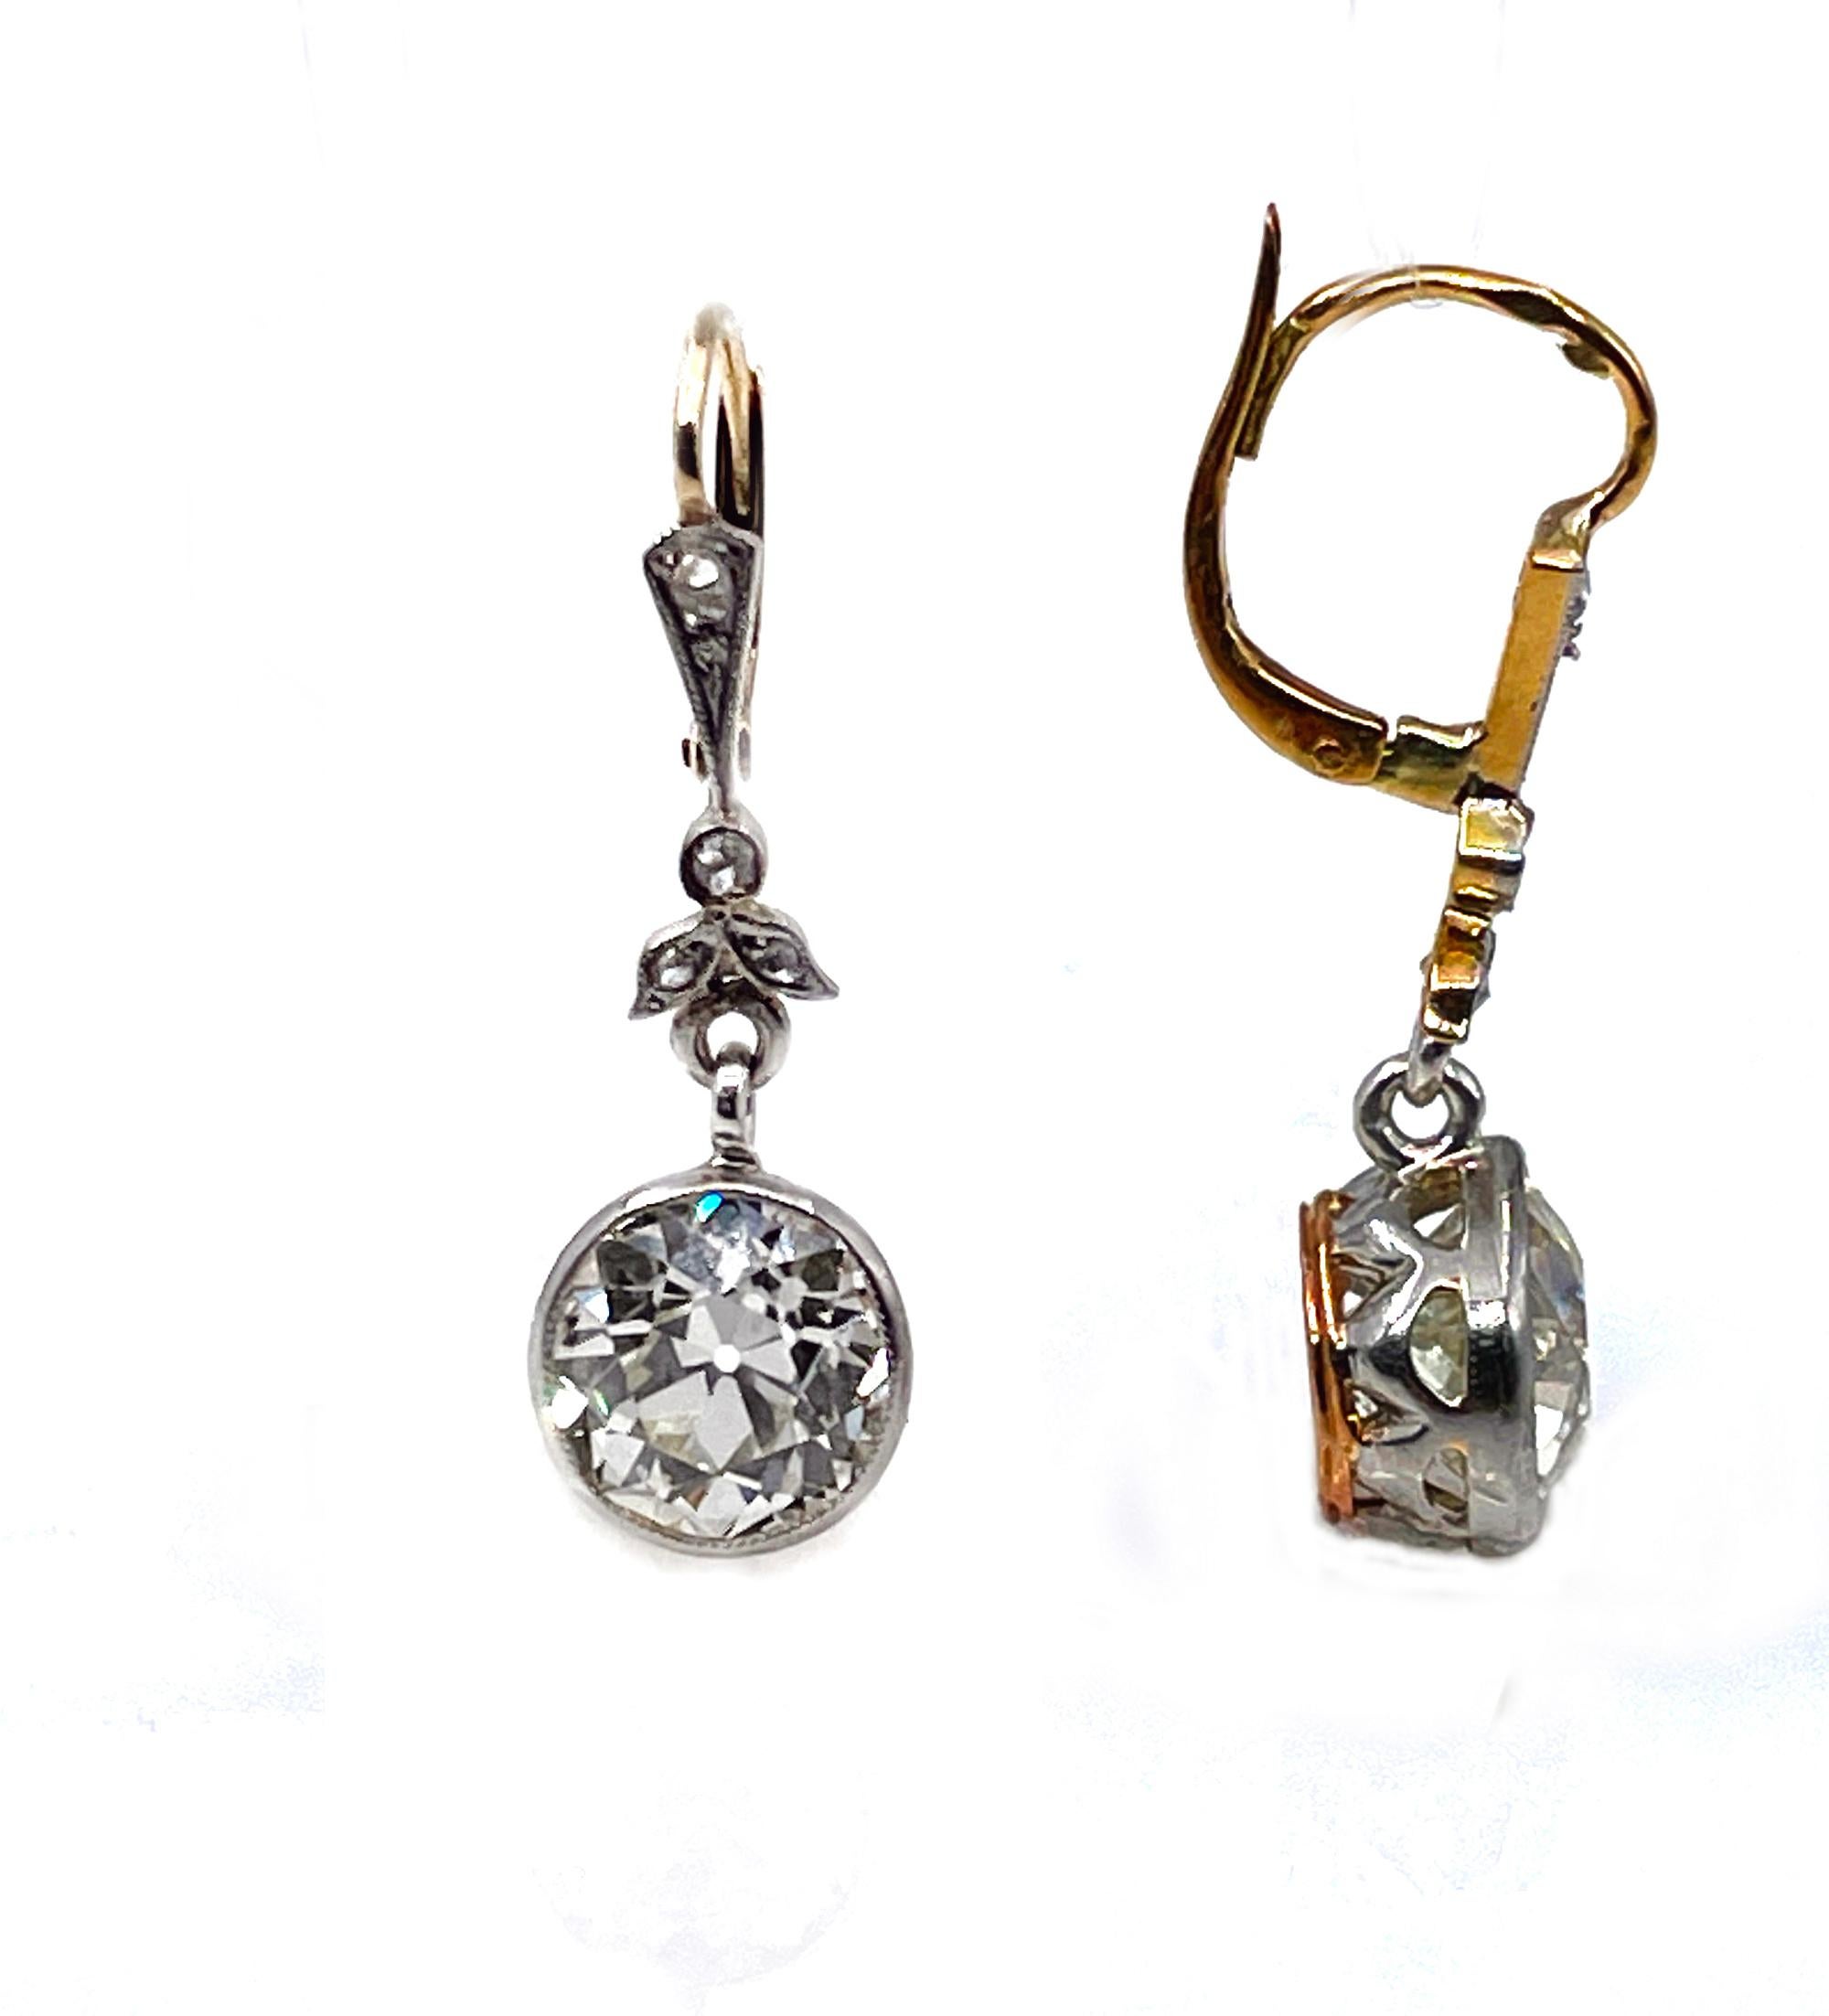 Exquisite pair of French Original Edwardian Era that screams Belle Époque. Most beautiful and unique European jewelry was made during that era right before Art Deco hit the world with it's straight lines!
Bezel Set shimmering Old European cut